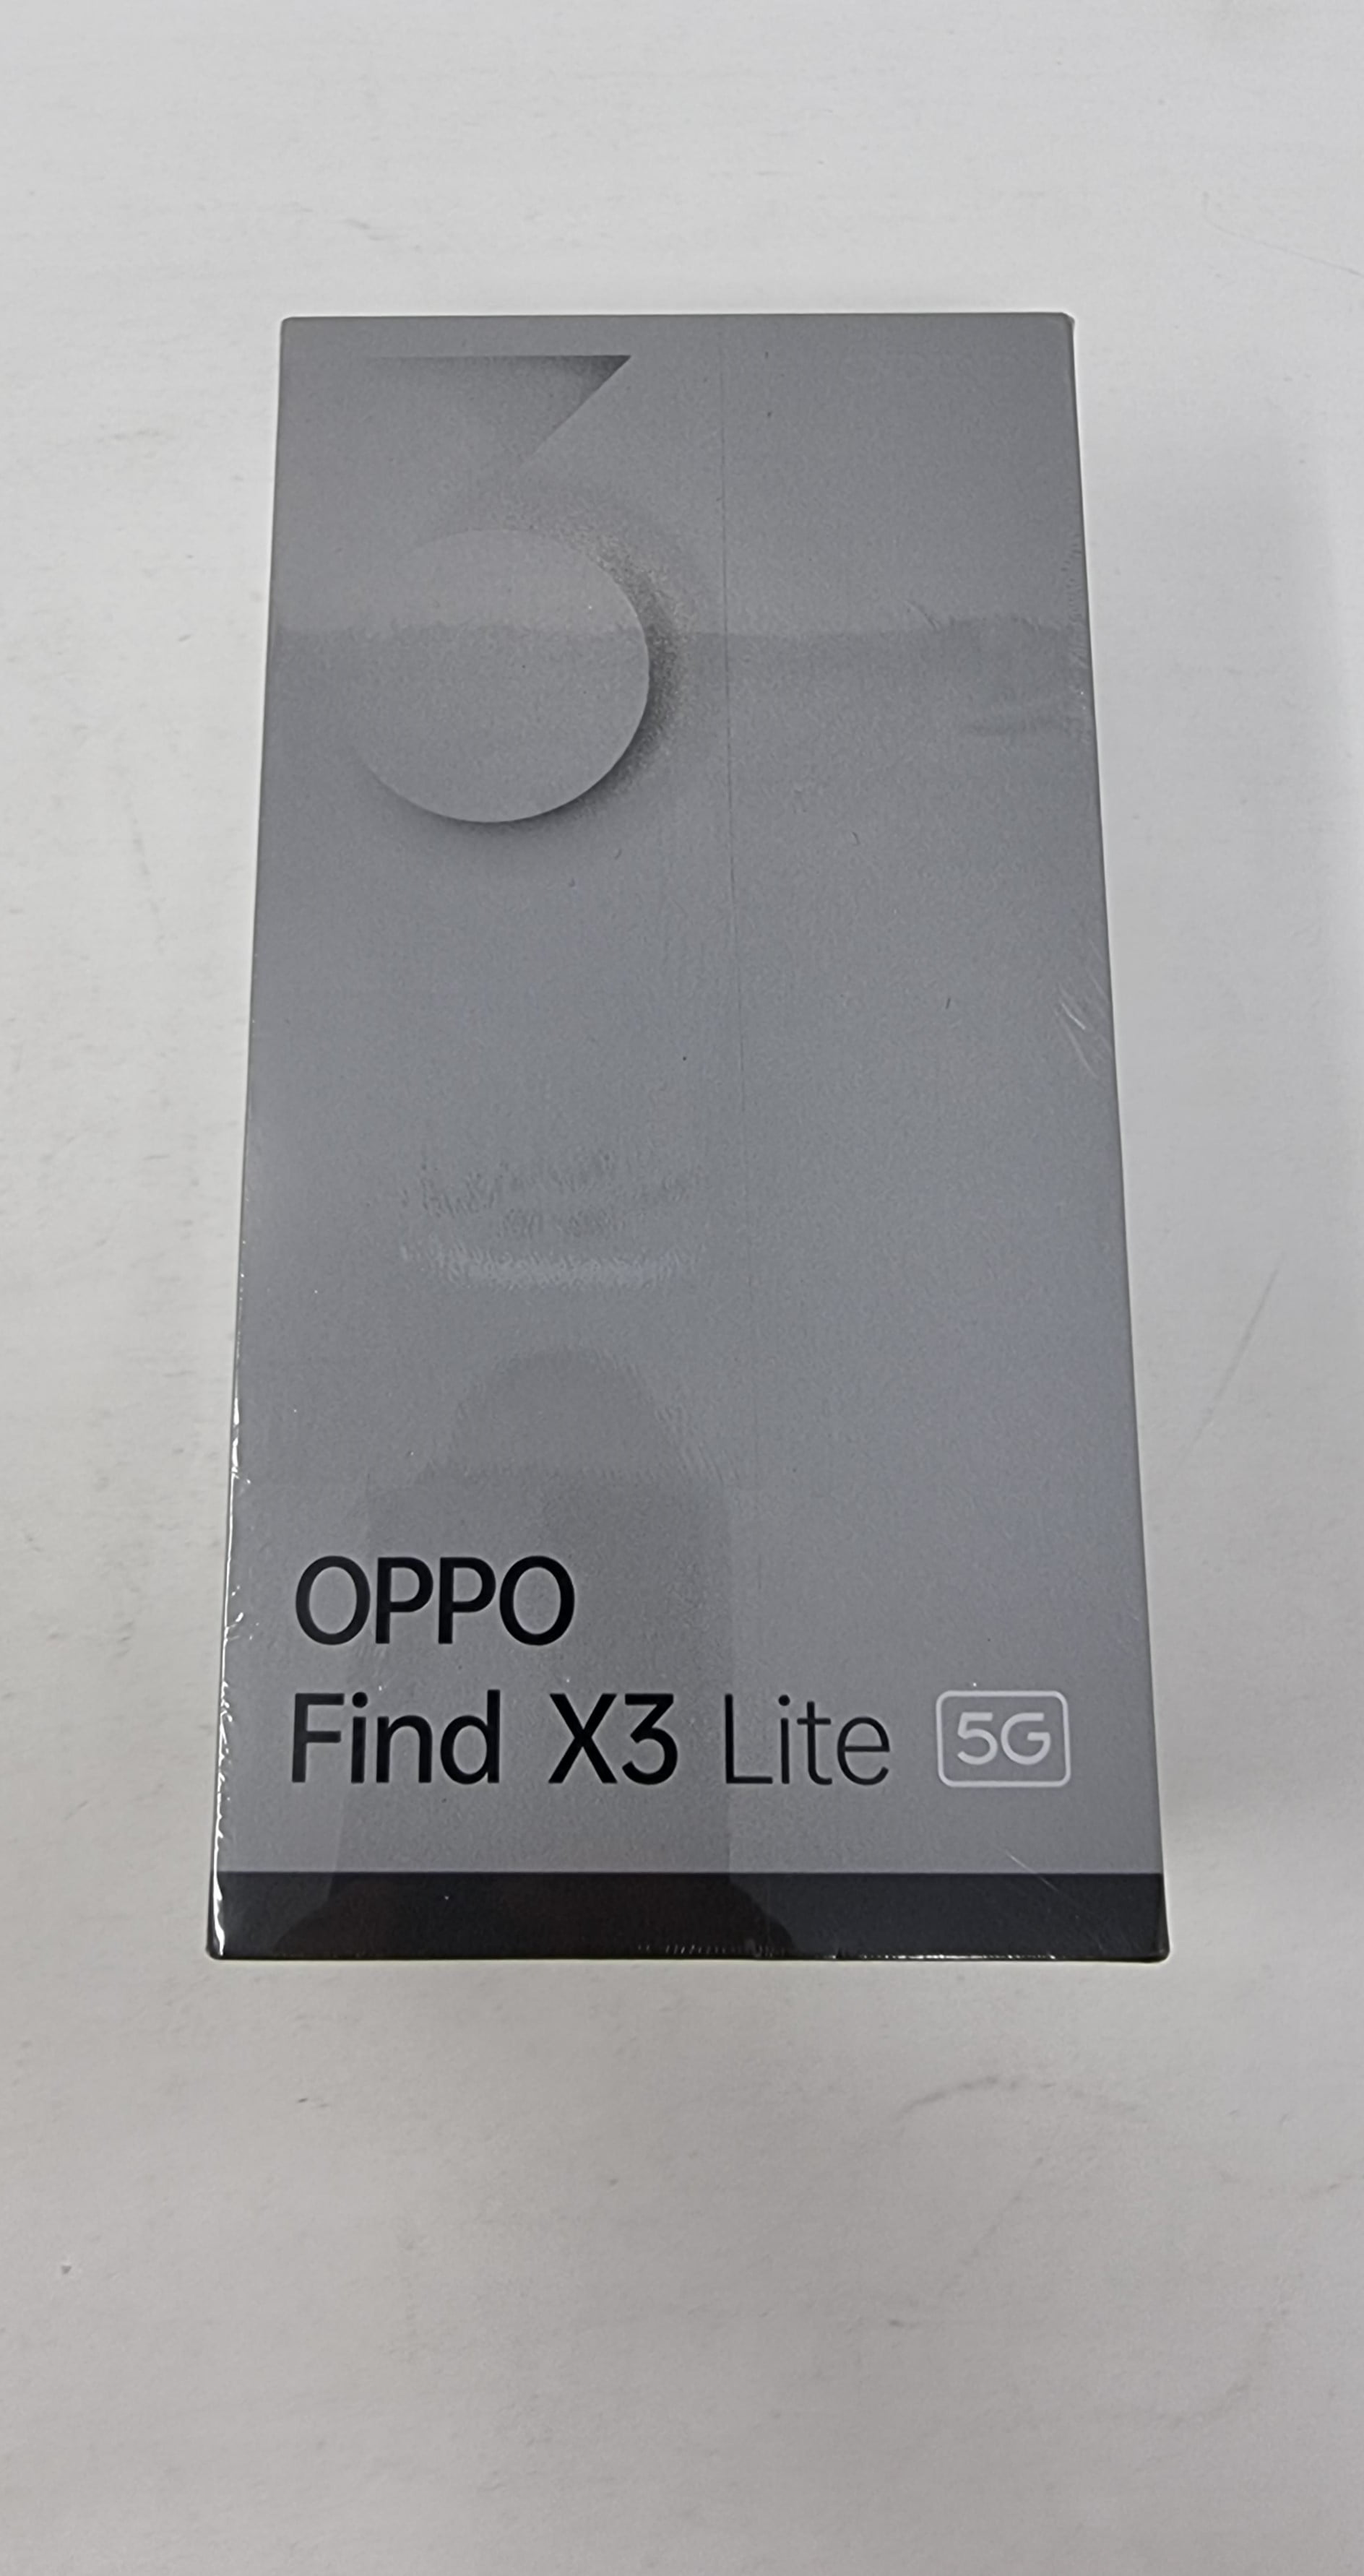  Oppo Find X3 Lite CPH2145 128GB 8GB RAM Factory Unlocked (GSM  Only  No CDMA - not Compatible with Verizon/Sprint) Global - Black : Cell  Phones & Accessories